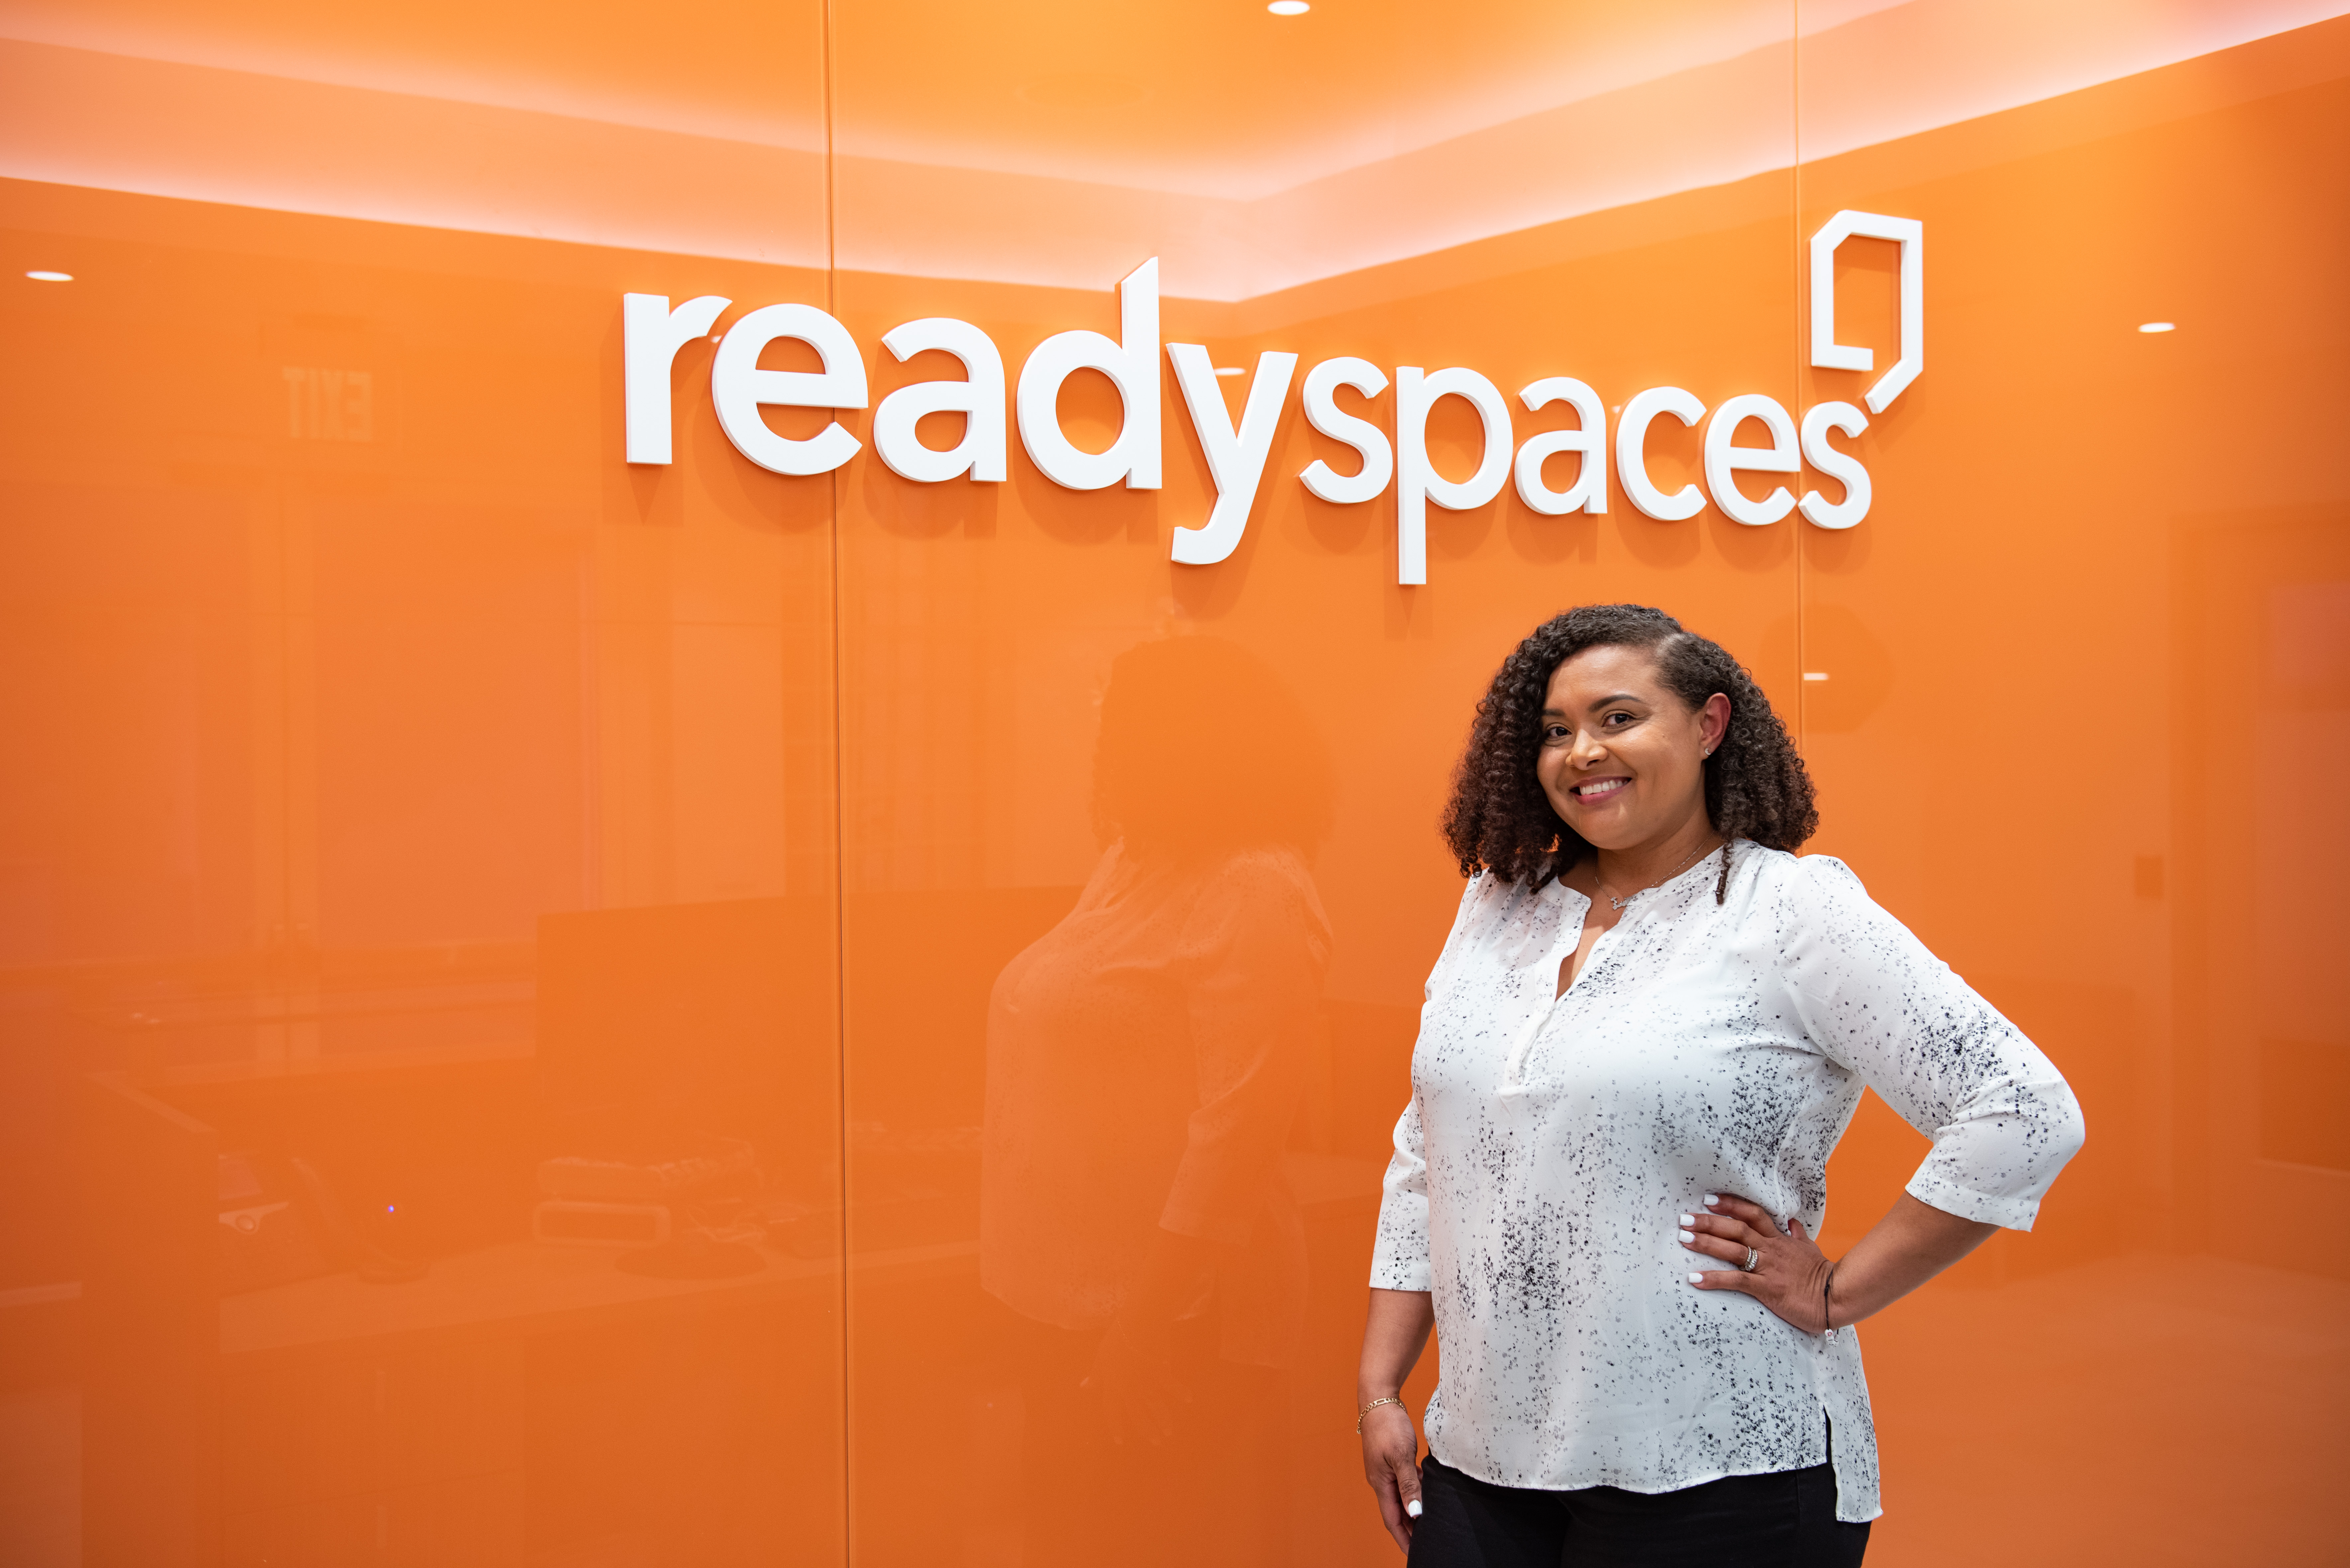 A day in the life of property management: readyspaces Office Manager Crystal Silburn